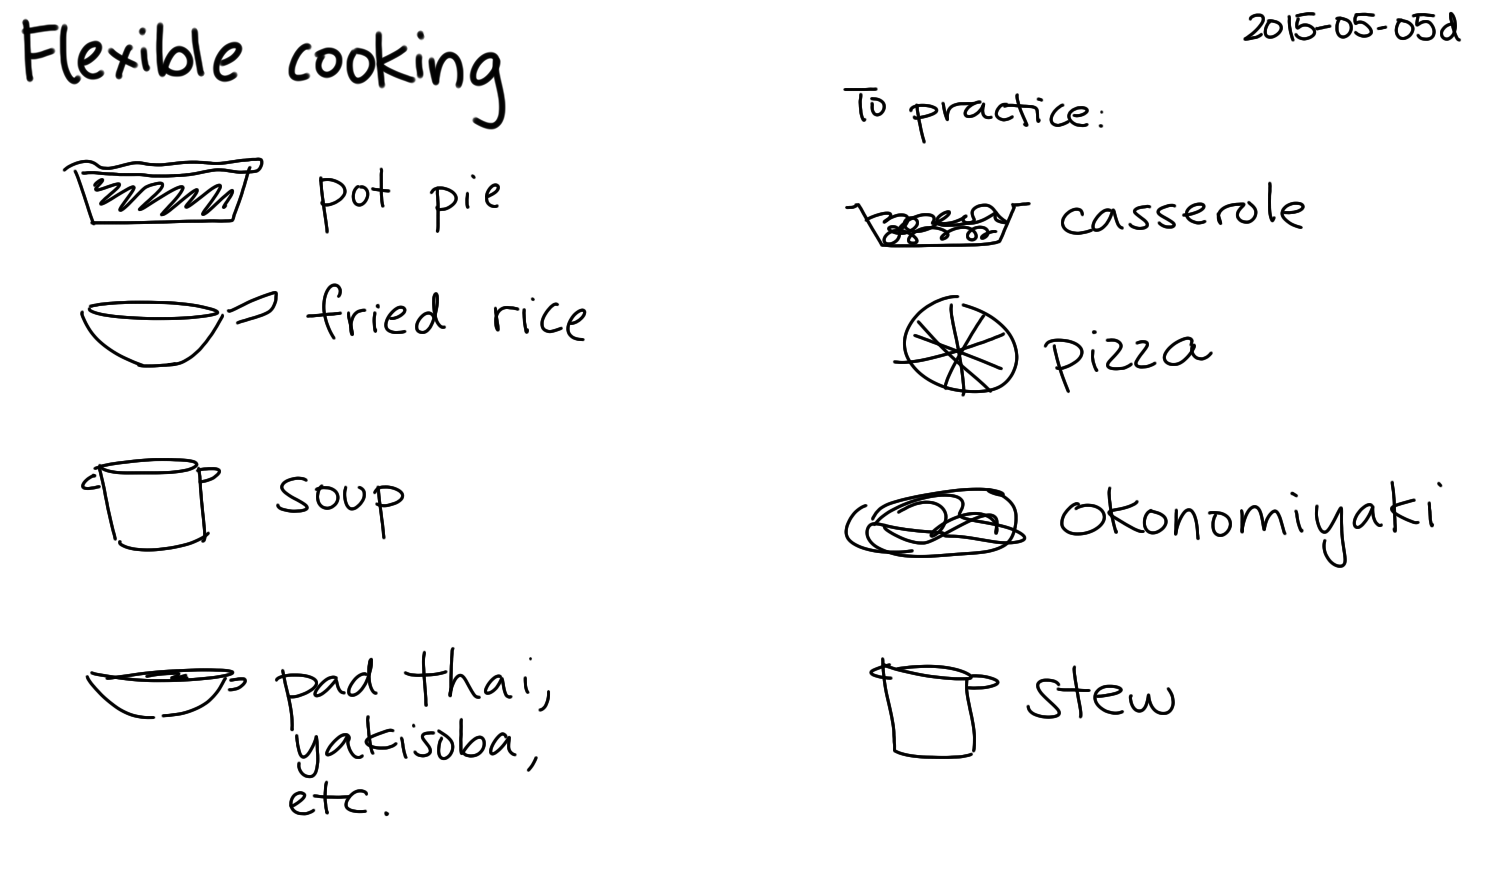 2015-05-05d Flexible cooking -- index card #cooking.png